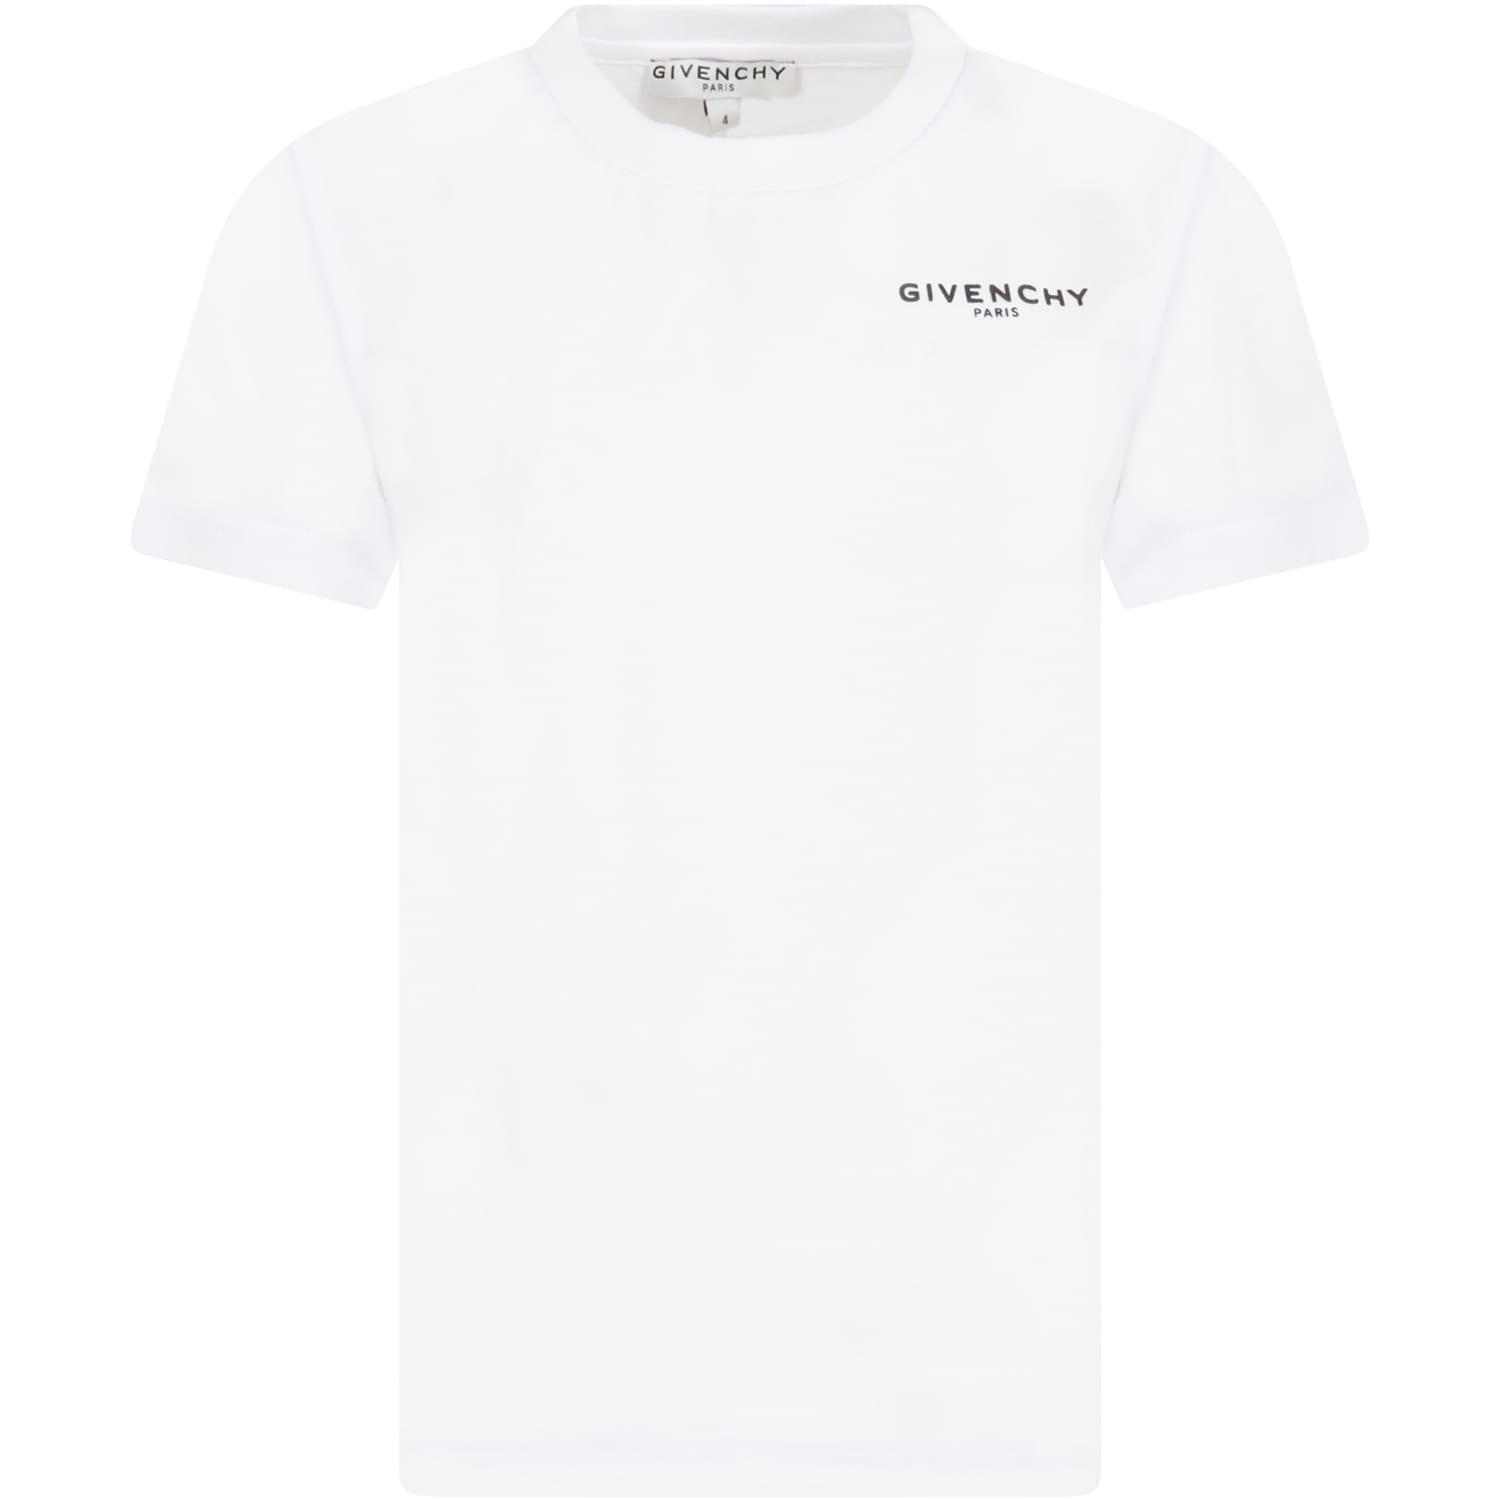 Givenchy White T-shirt For Kids With Logo